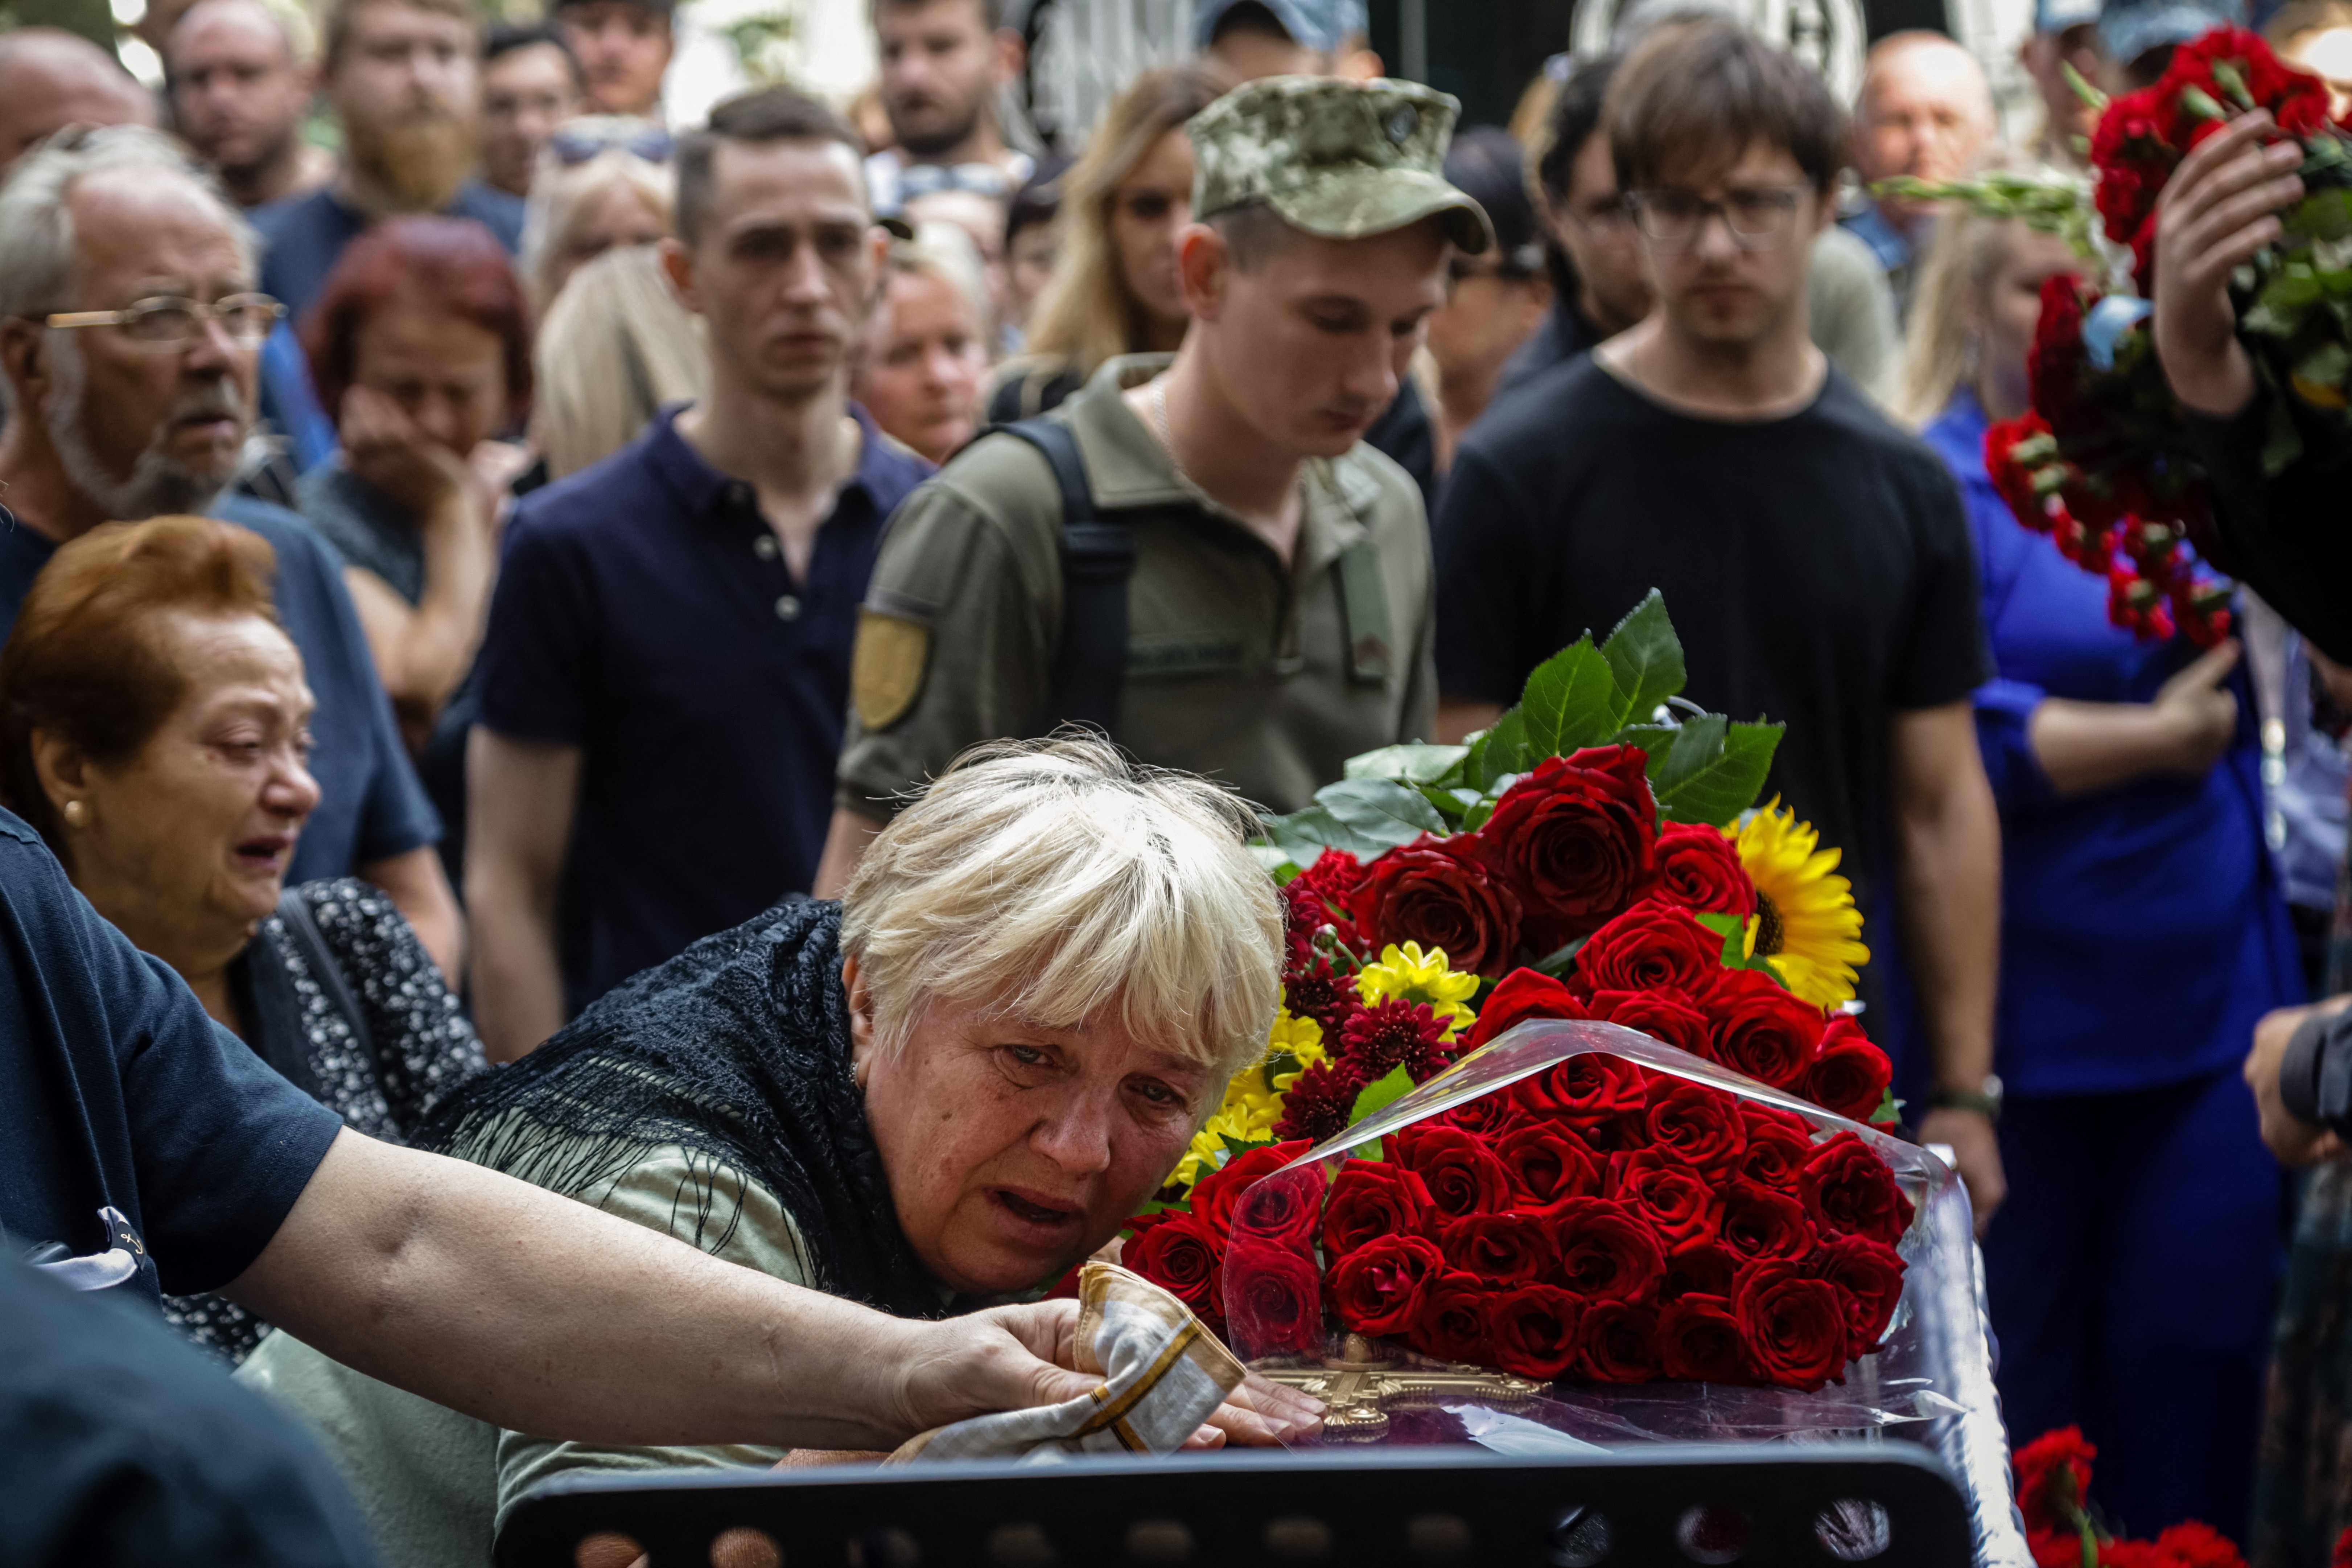 Relatives mourn a slain Ukrainian soldier at a funeral in Odesa on Friday